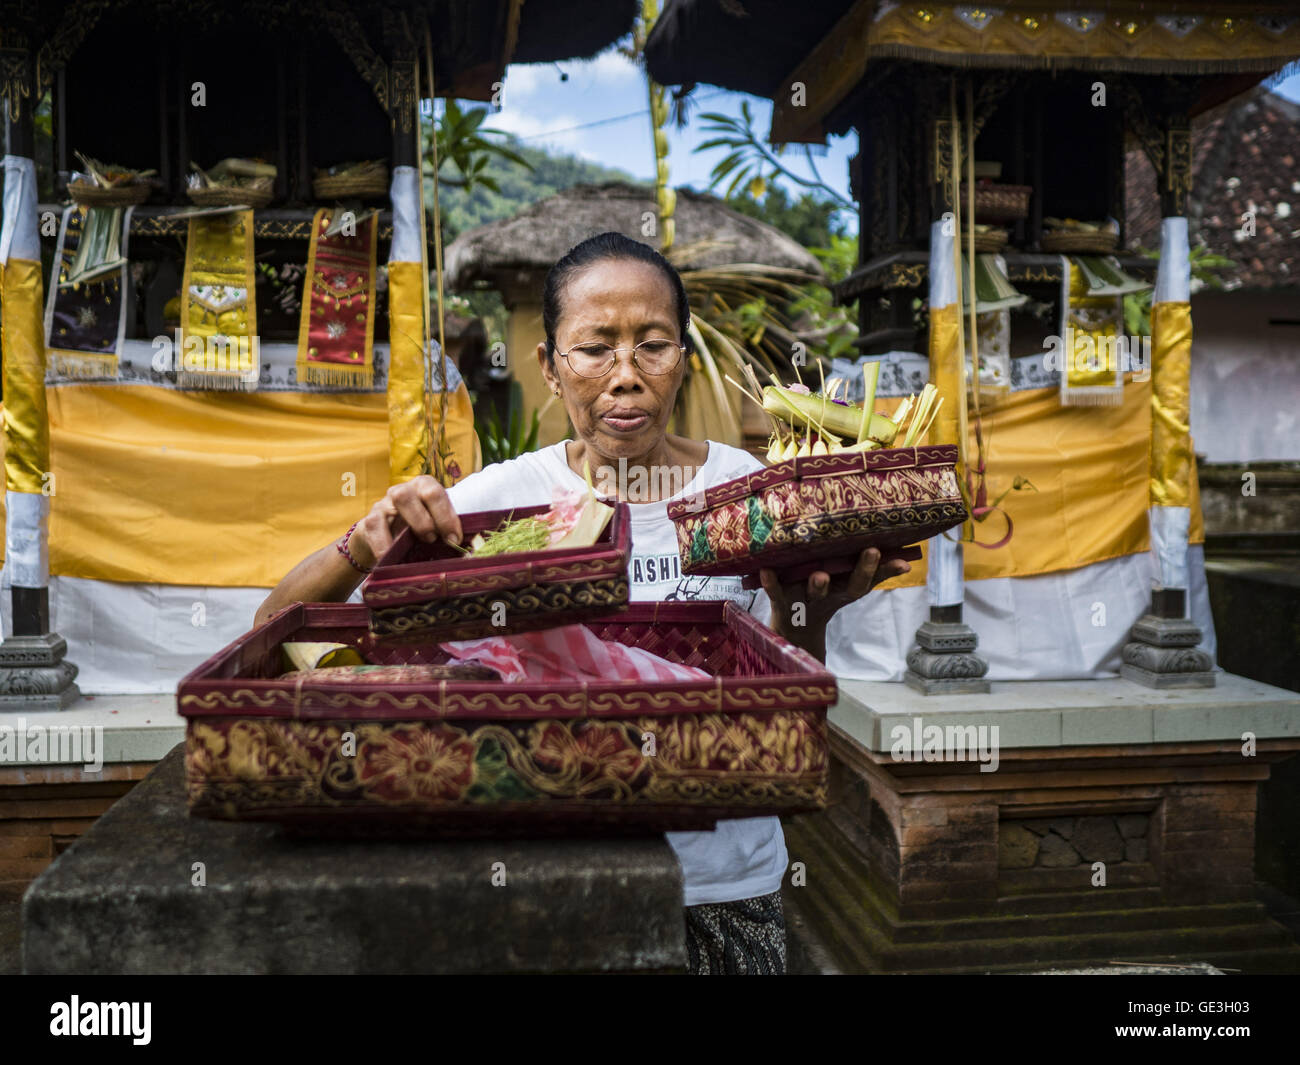 July 22, 2016 - Tenganan Duah Tukad, Bali, Indonesia - A woman makes an offering in her family temple in the Tenganan Duah Tukad village on Bali before the Pandanus fights. The ritual Pandanus fights are dedicated to Hindu Lord Indra. Men engage in ritual combat with spiky pandanus leaves and rattan shields. They usually end up leaving bloody scratches on the combatants' backs. The young girls from the community wear their best outfits to watch the fights. The fights have been traced to traditional Balinese beliefs from the 14th century CE. The fights are annual events in the Balinese year, wh Stock Photo